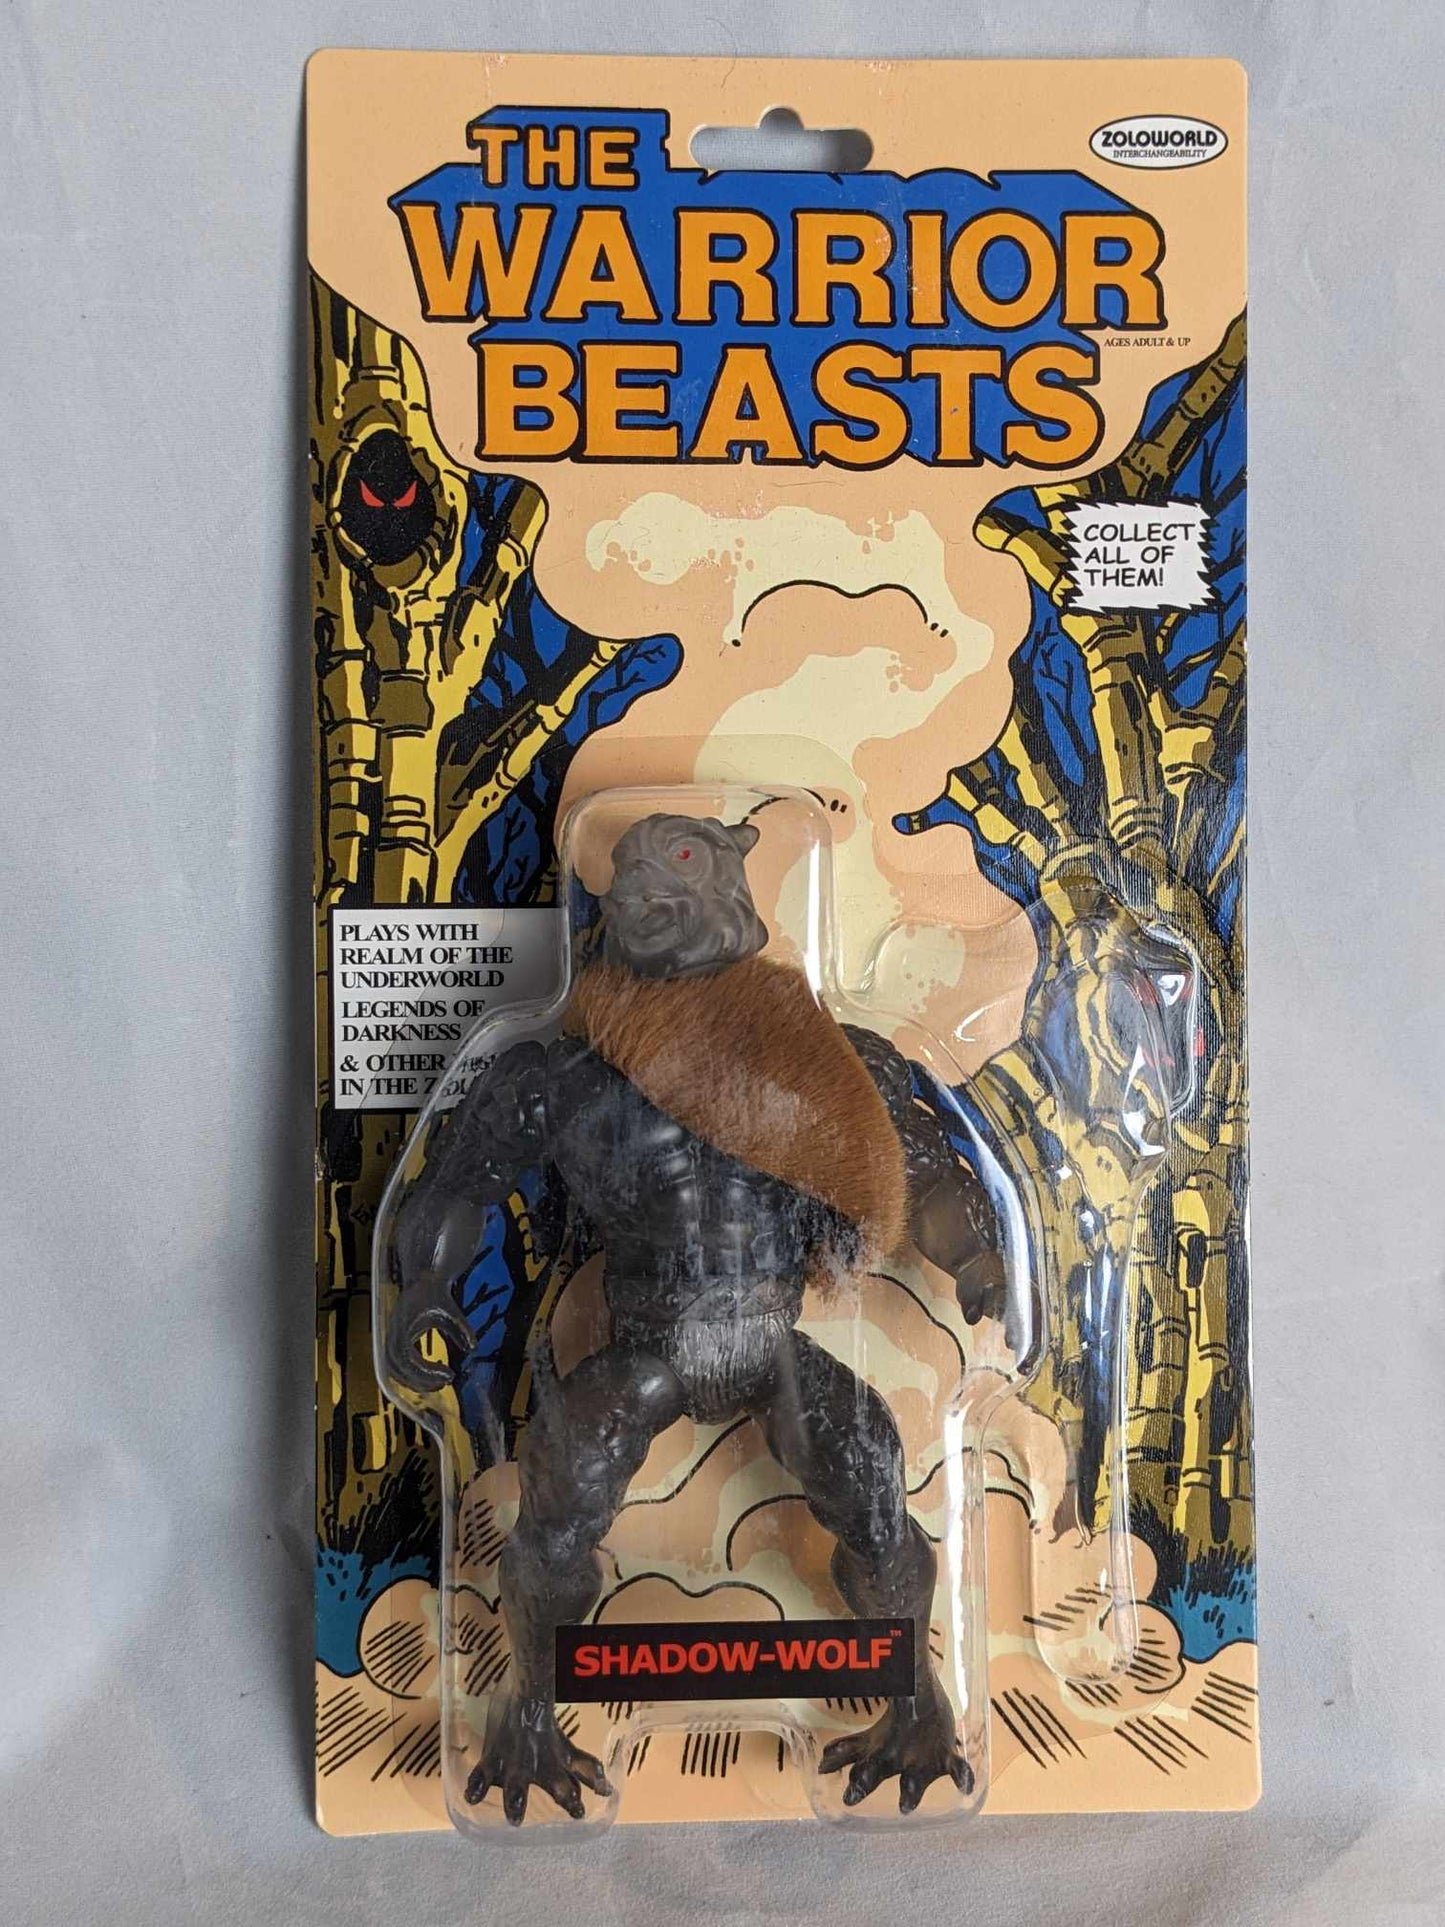 Zoloworld The Warrior Beasts SHADOW WOLF PACKAGE SAMPLE MOC Action Figure VAULT LOW PRODUCTION